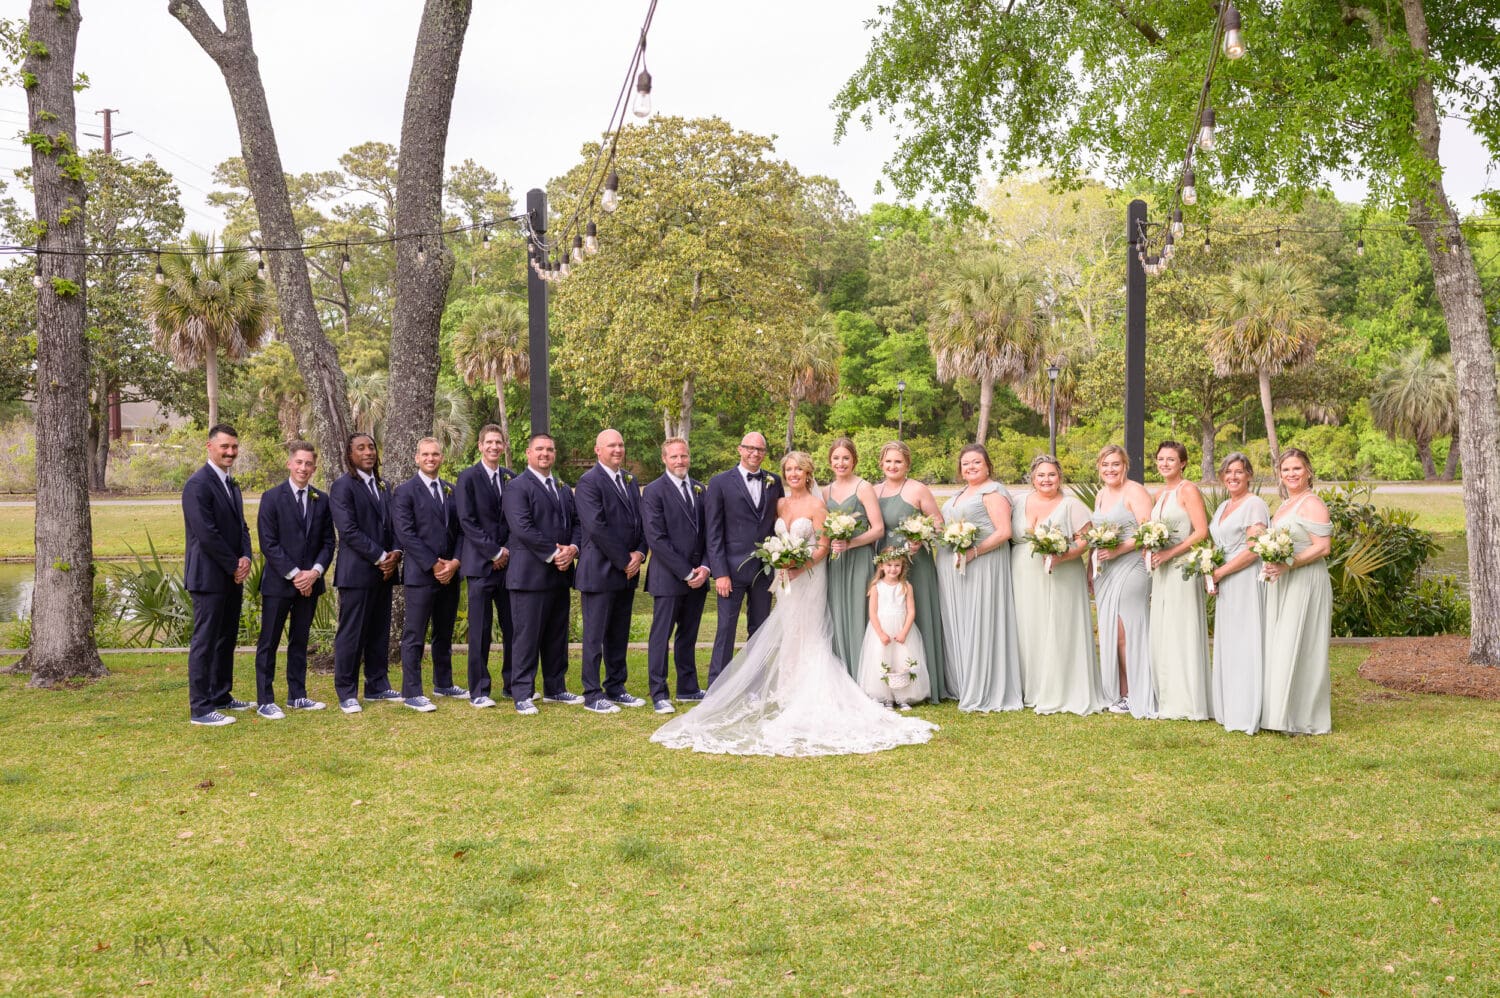 Large bridal party on the lawn - The Village House at Litchfield